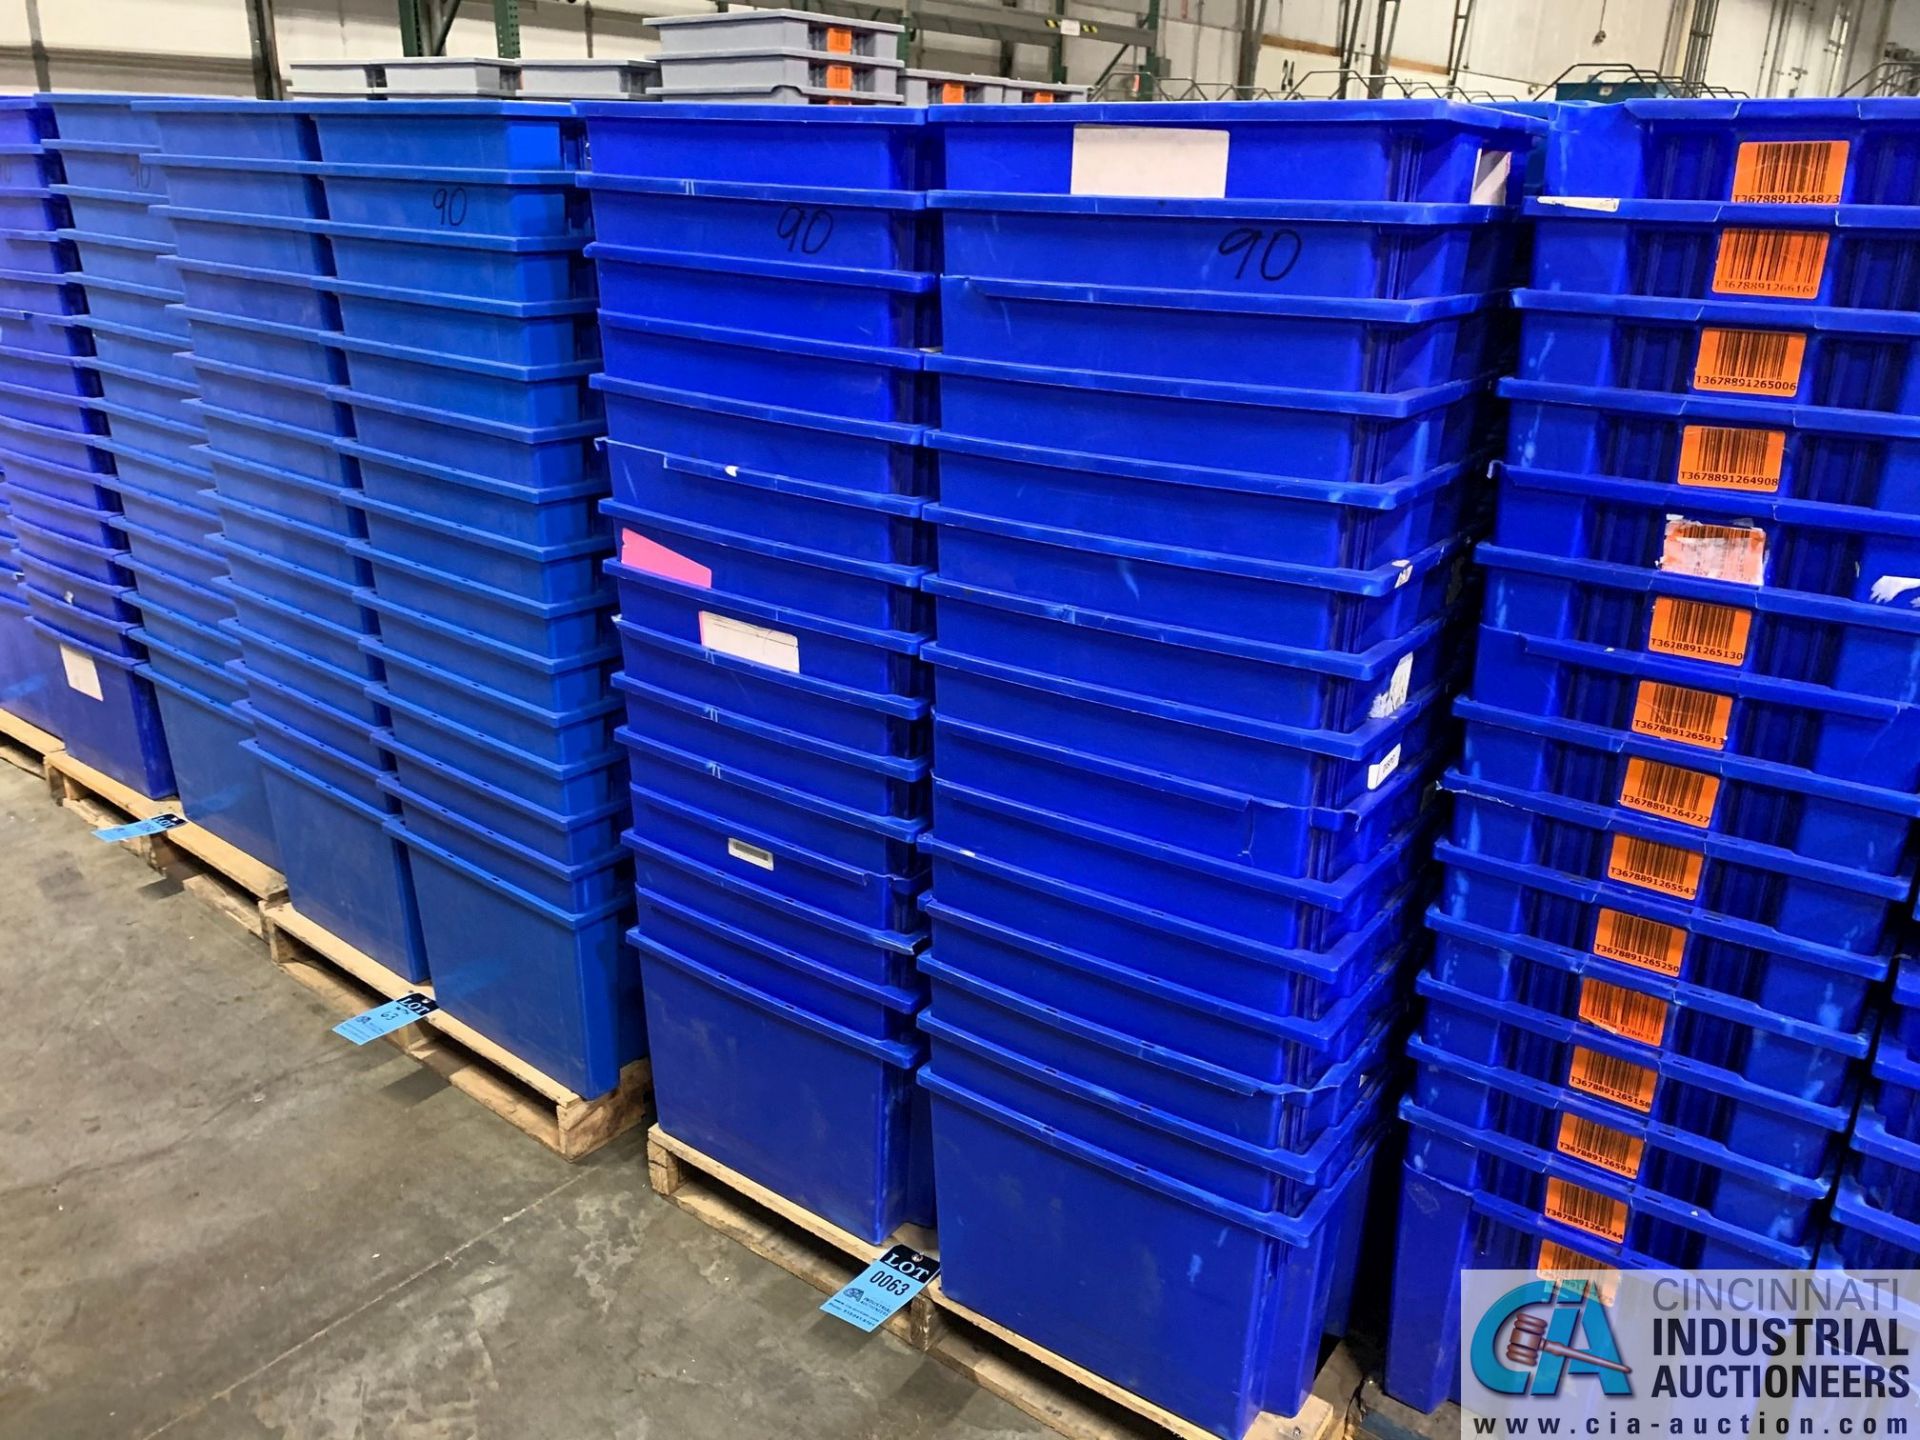 AKRO-MILS PRODUCT NO. 35-195 NEST AND STACK PLASTIC TOTES - (2) SKIDS